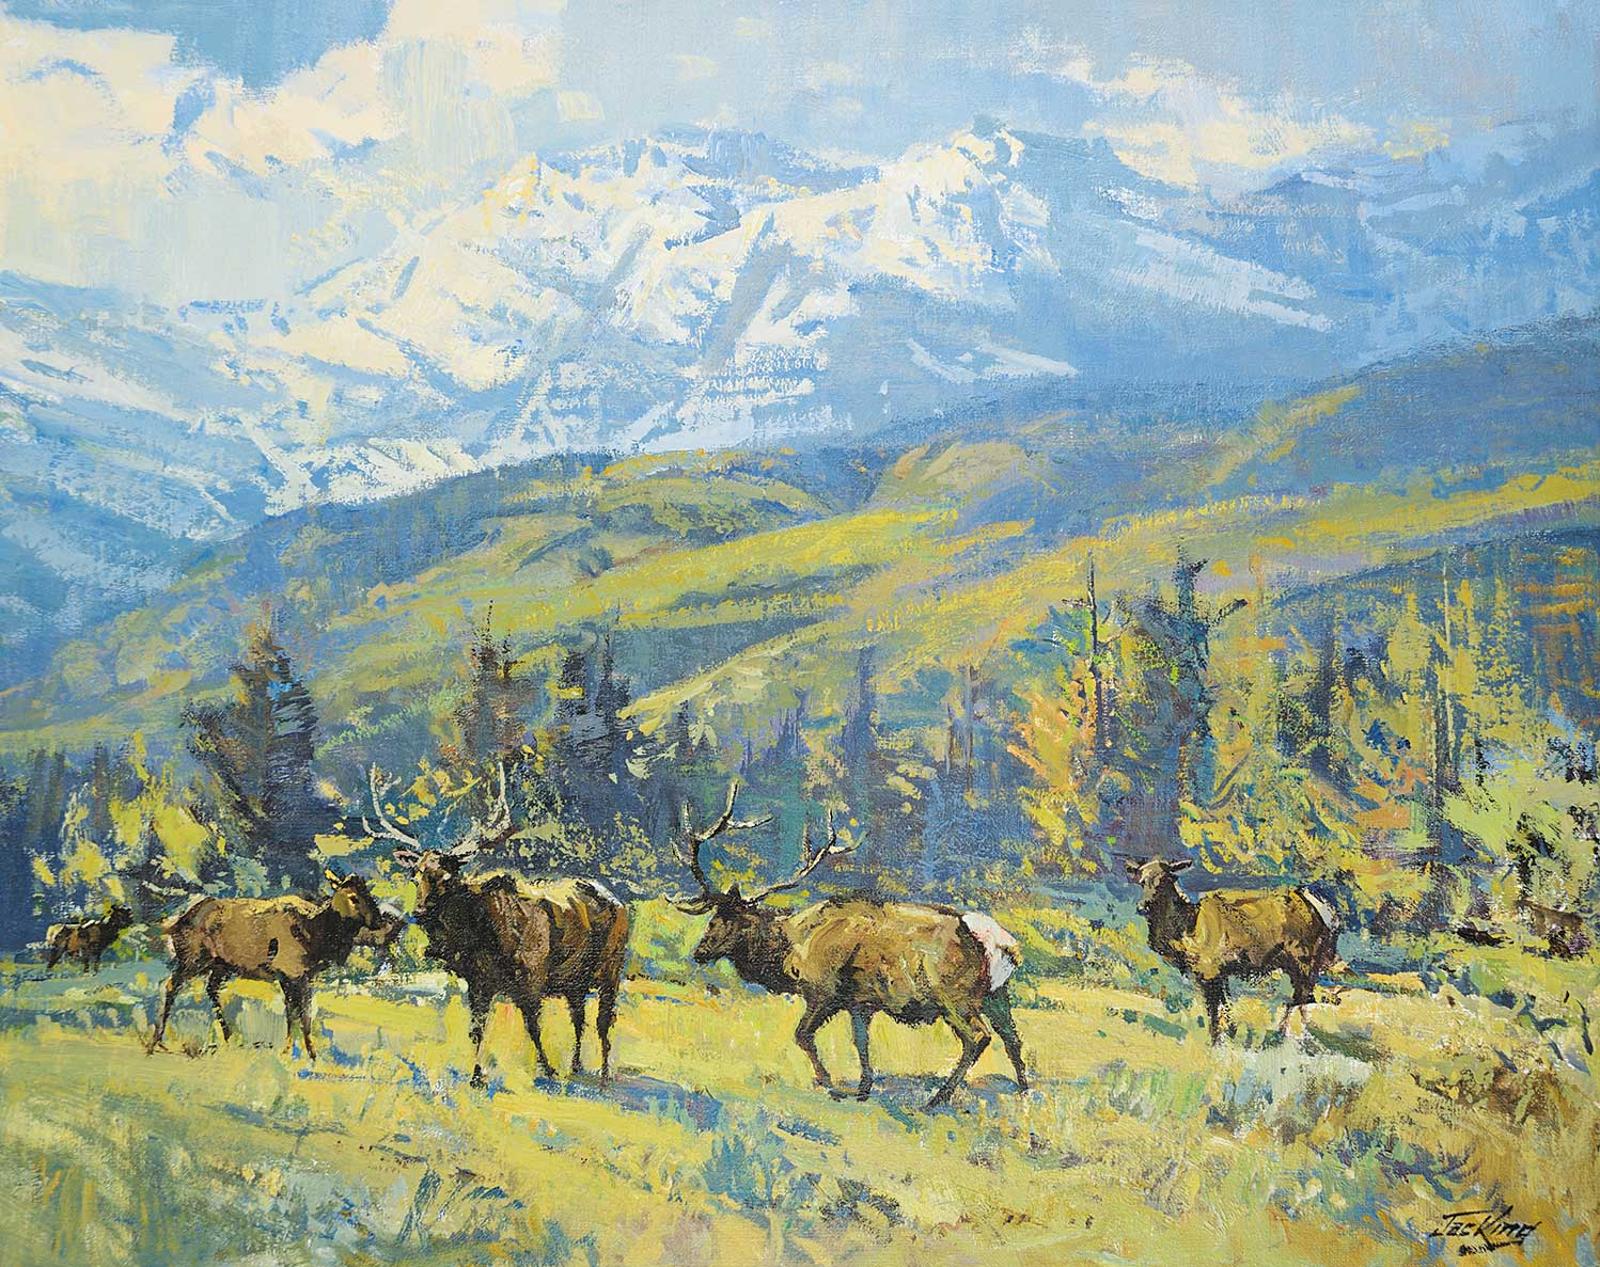 Jack [Jac] Elmo King (1920-1998) - Untitled - Elk Herd in the Mountain Pass